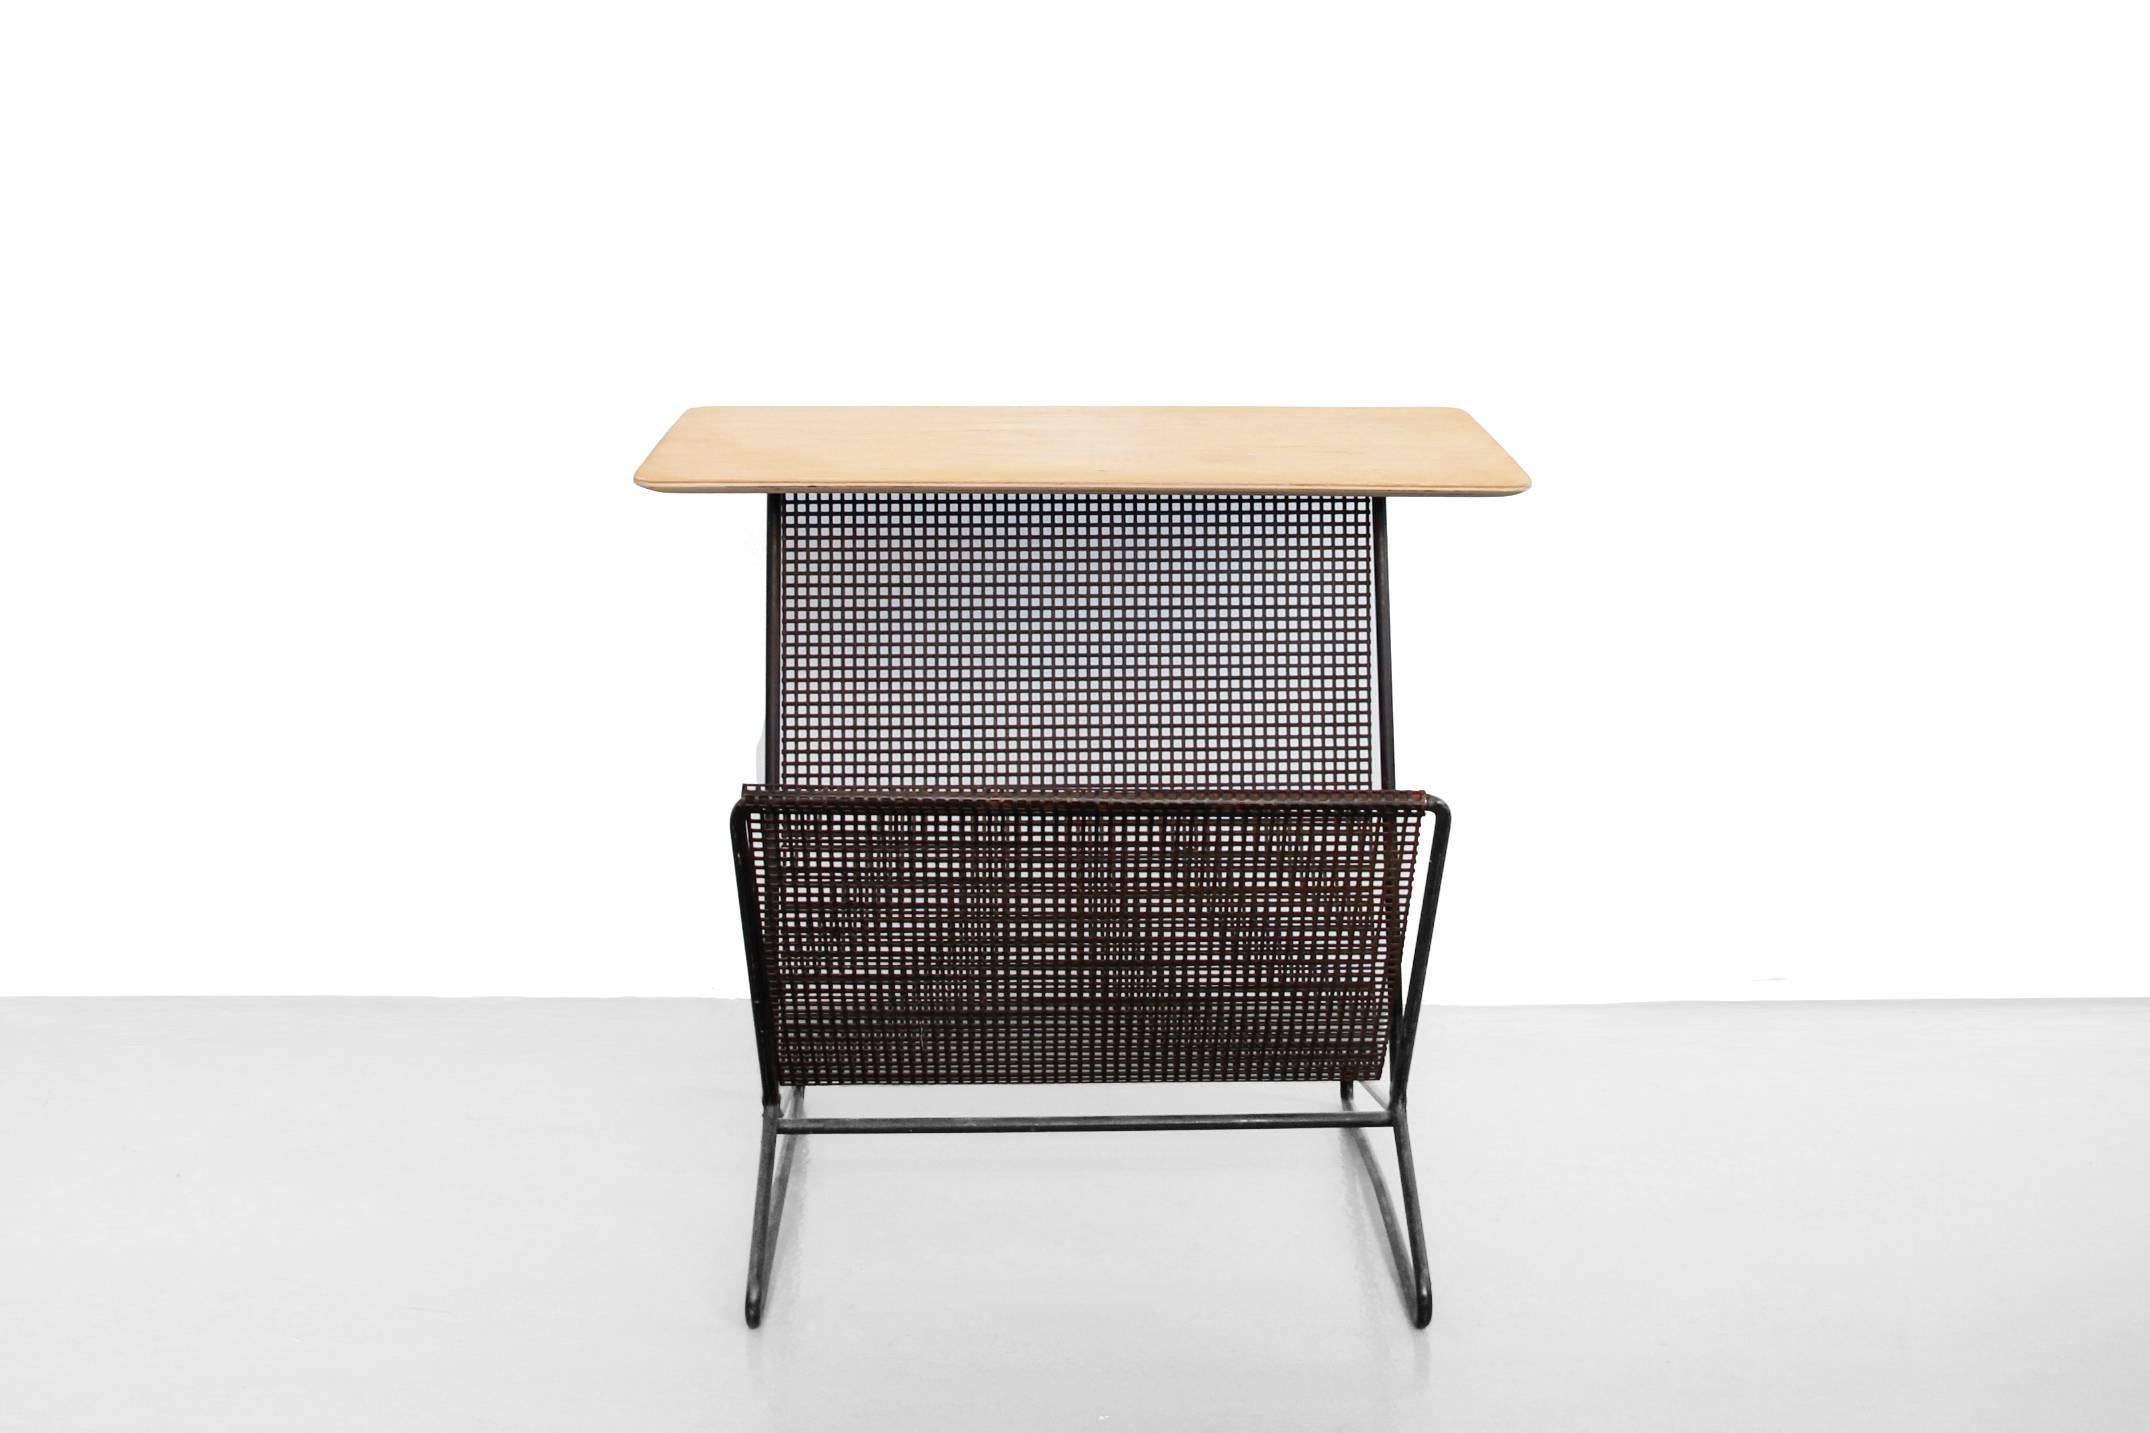 This Minimalist table with magazine rack was designed by Cees Braakman for Pastoe. It has model name TM05 from the Combex series. This rare side table is made from a black-lacquered frame, with a perforated magazine rack and a birch plywood